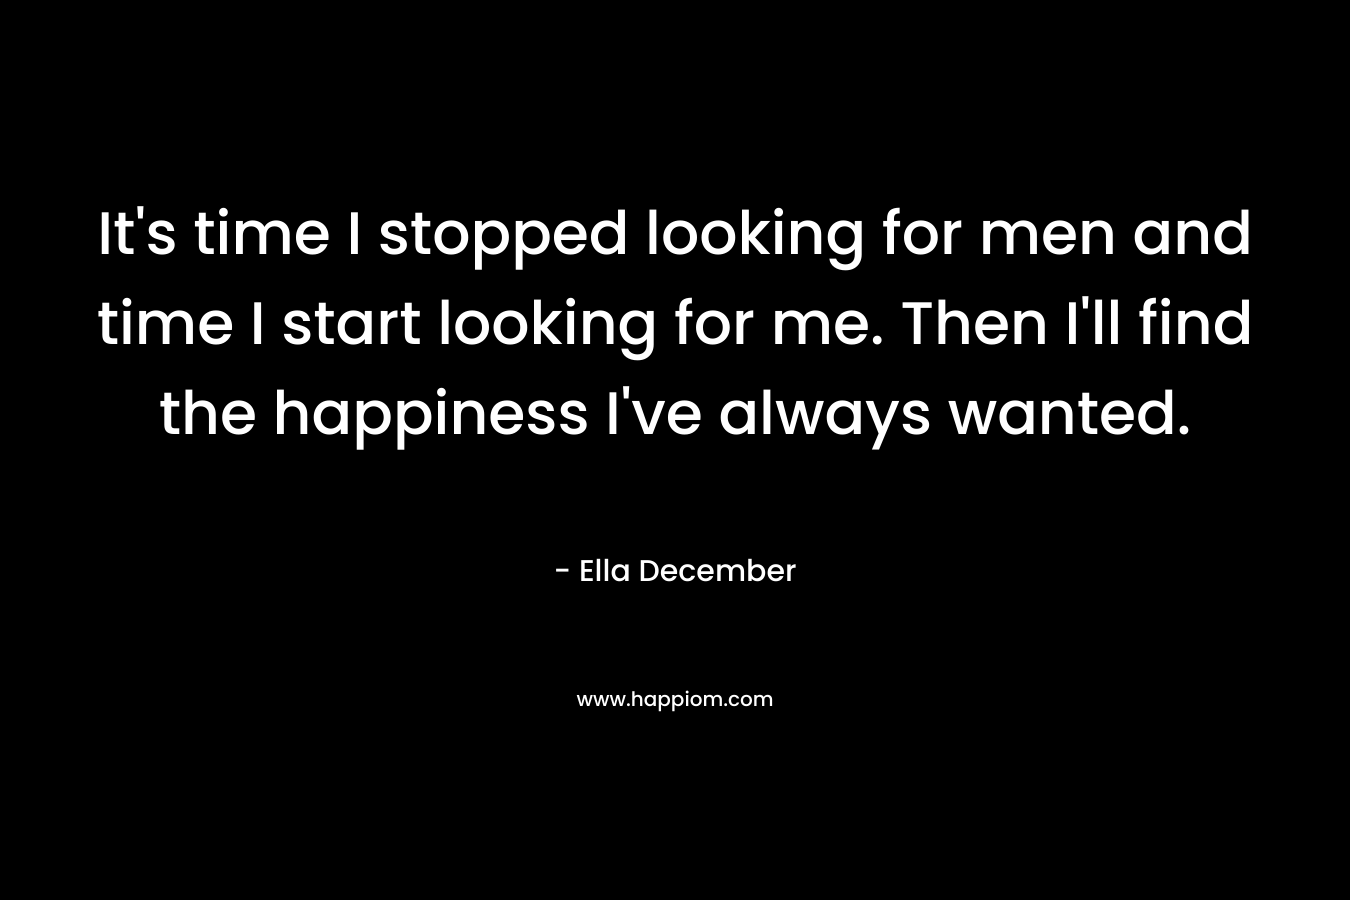 It’s time I stopped looking for men and time I start looking for me. Then I’ll find the happiness I’ve always wanted. – Ella December